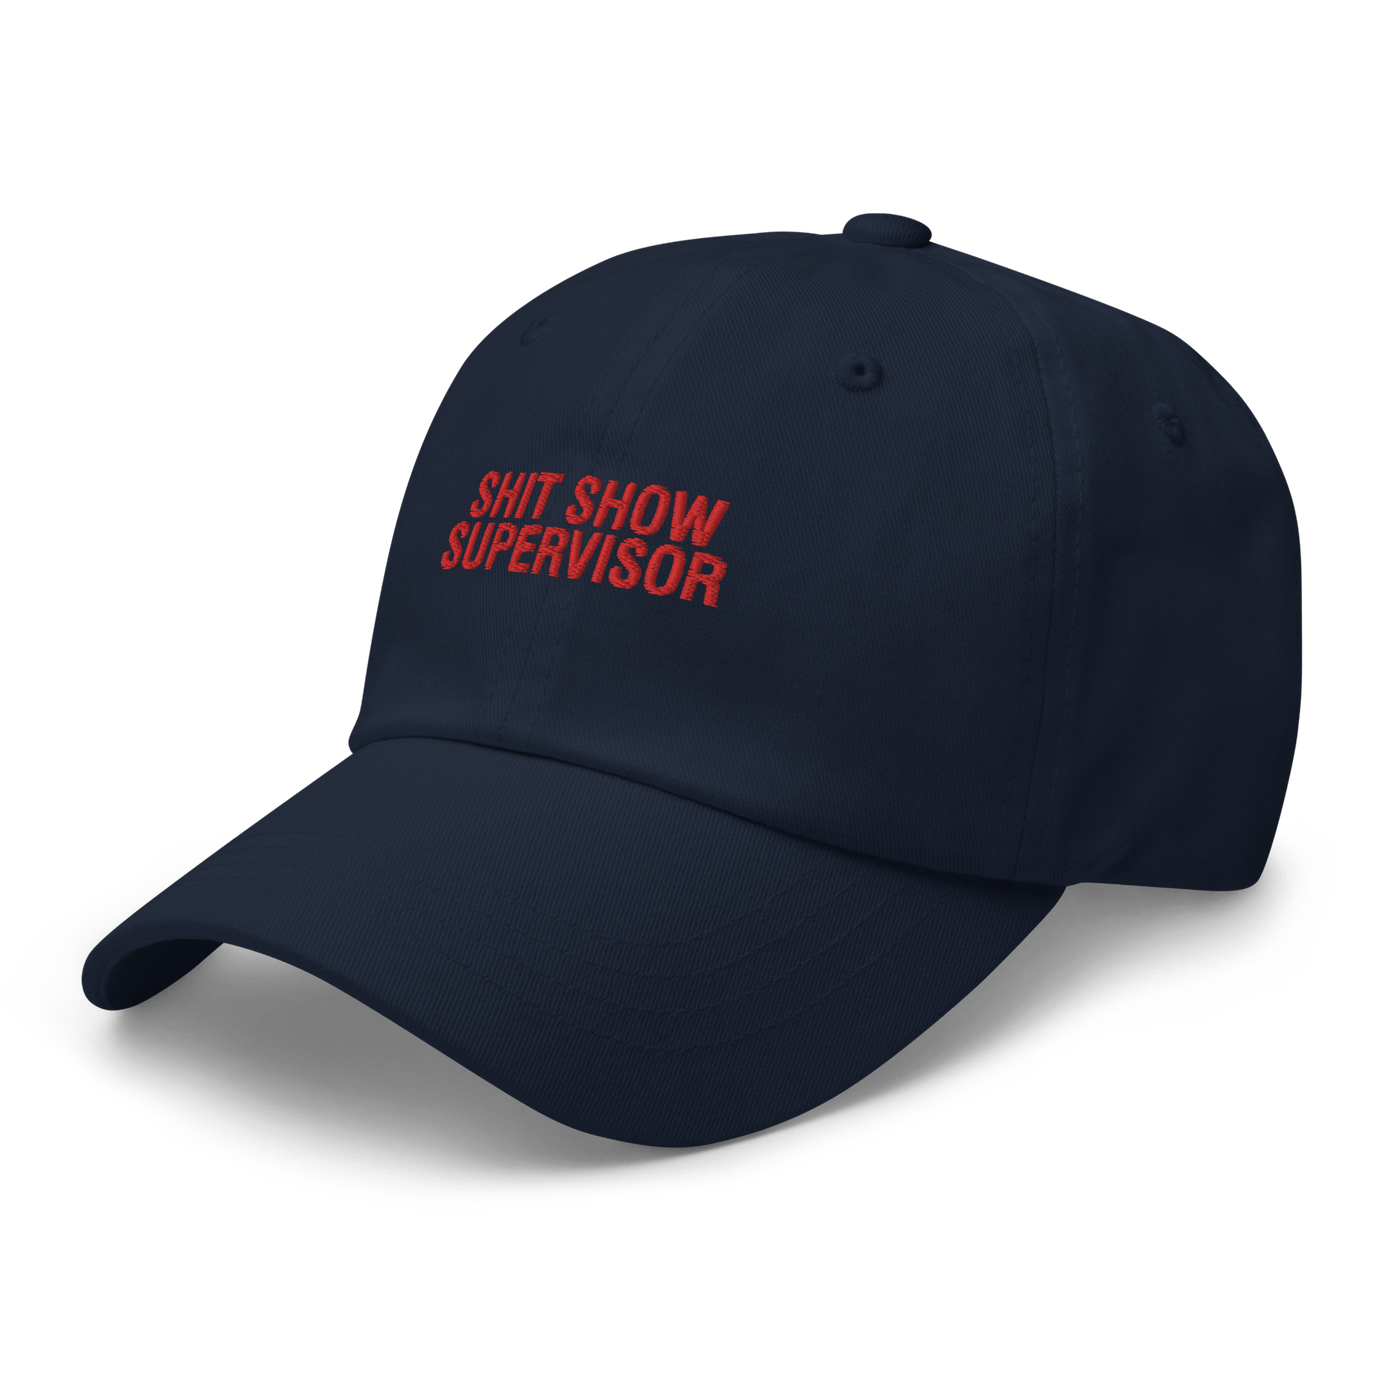 Shit Show Supervisor Dad hat - Navy - Just Another Cap Store